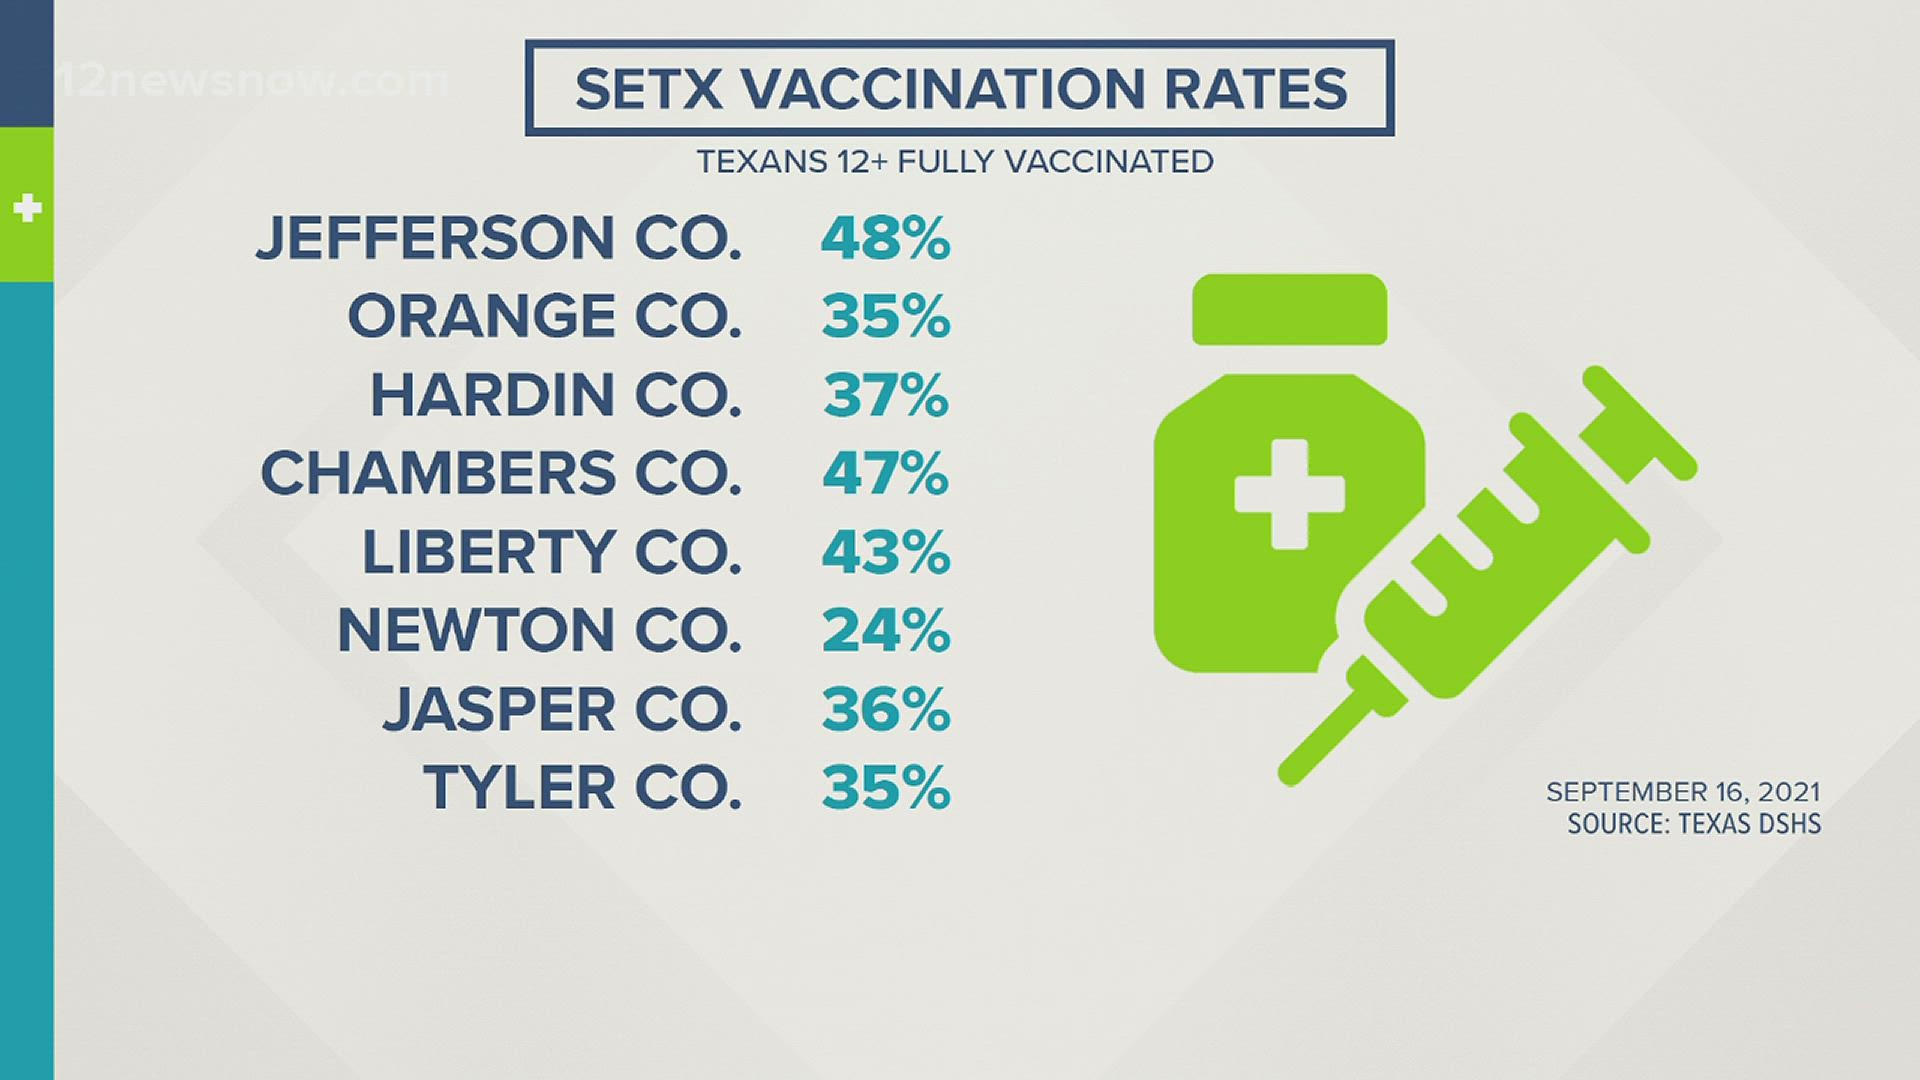 Southeast Texas is far behind the state in the number of people who are fully vaccinated.